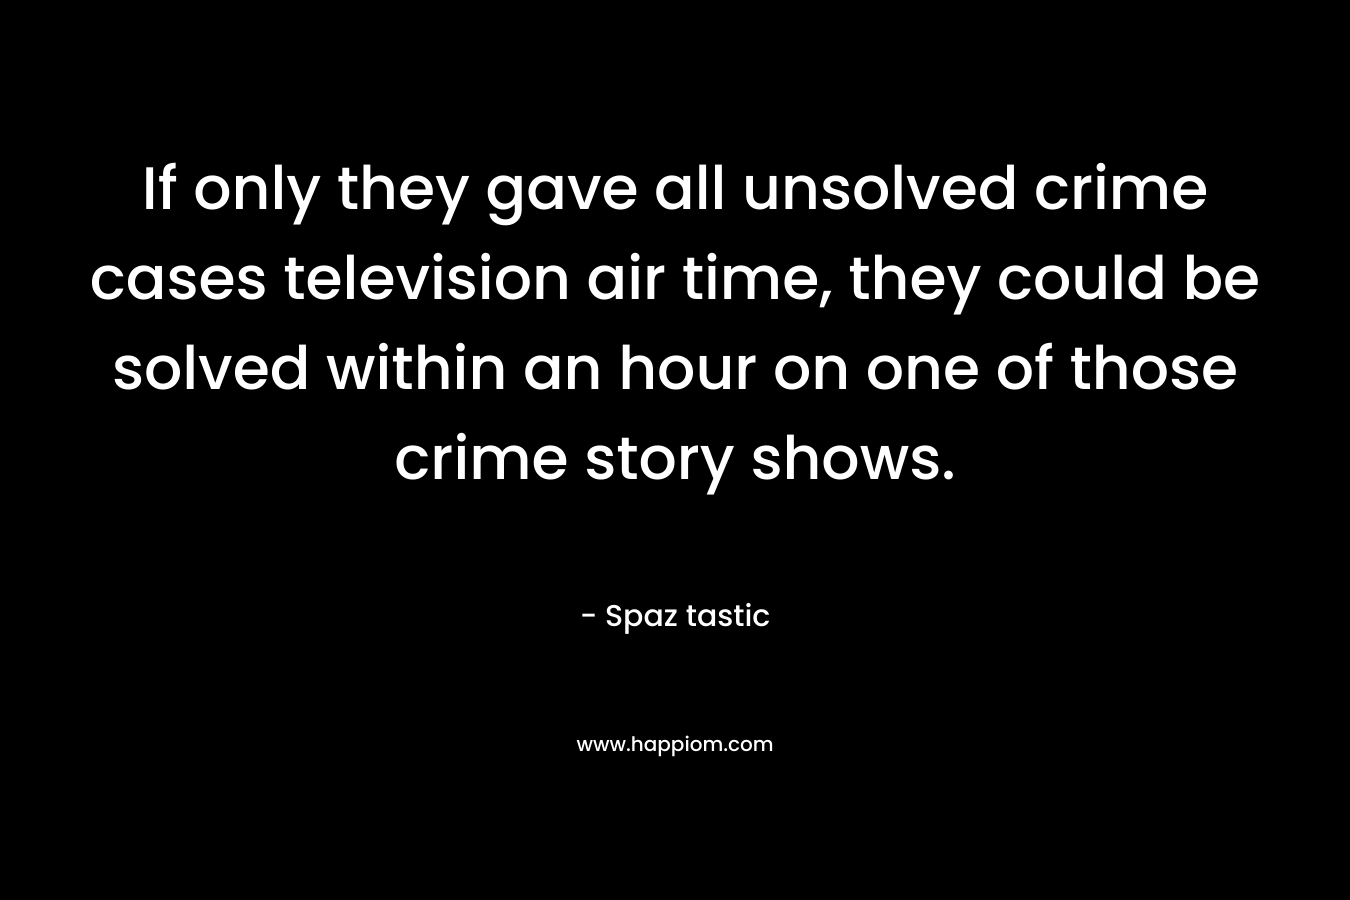 If only they gave all unsolved crime cases television air time, they could be solved within an hour on one of those crime story shows.